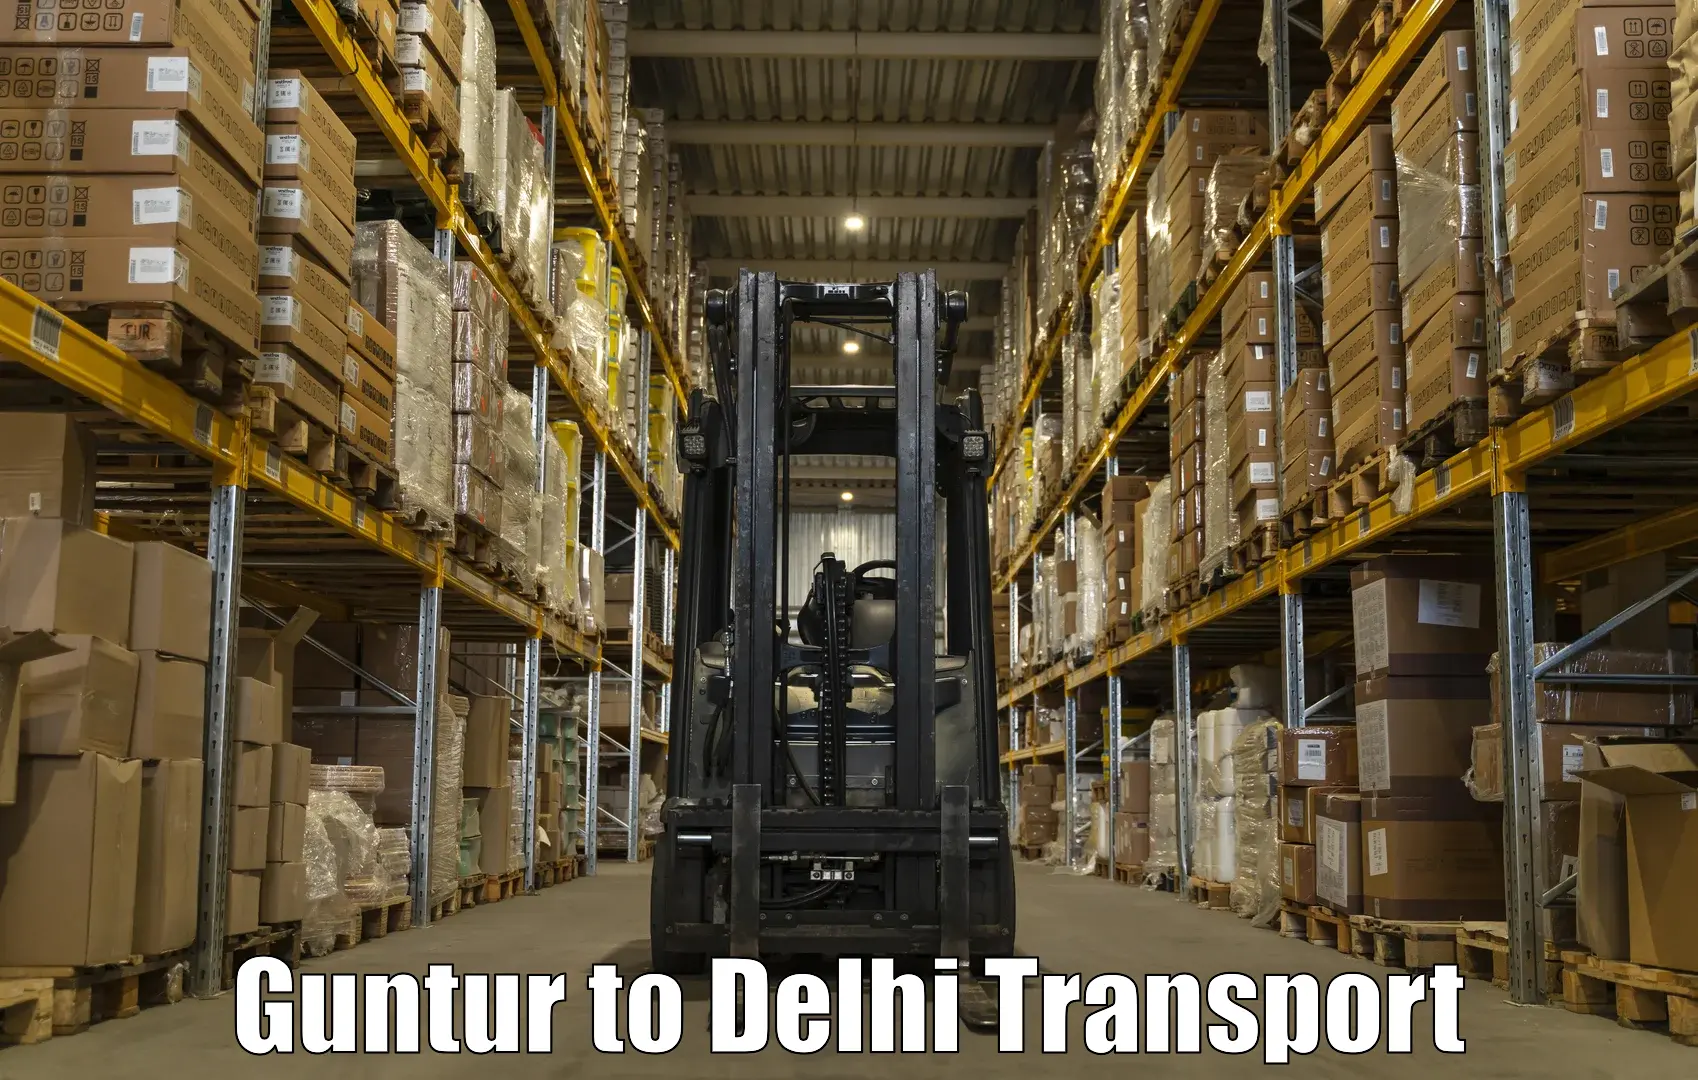 Air freight transport services Guntur to NCR